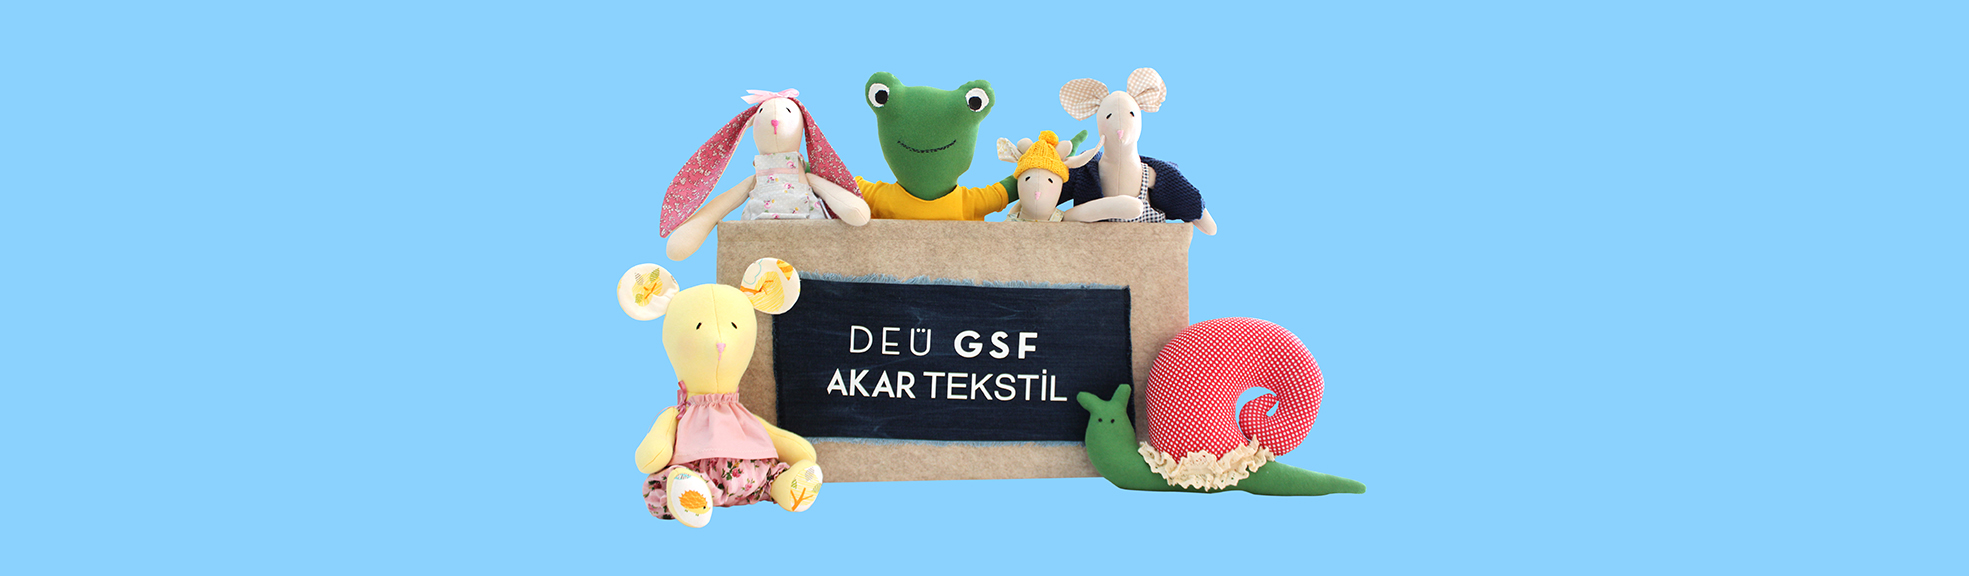 Sustainable Stories with Toys